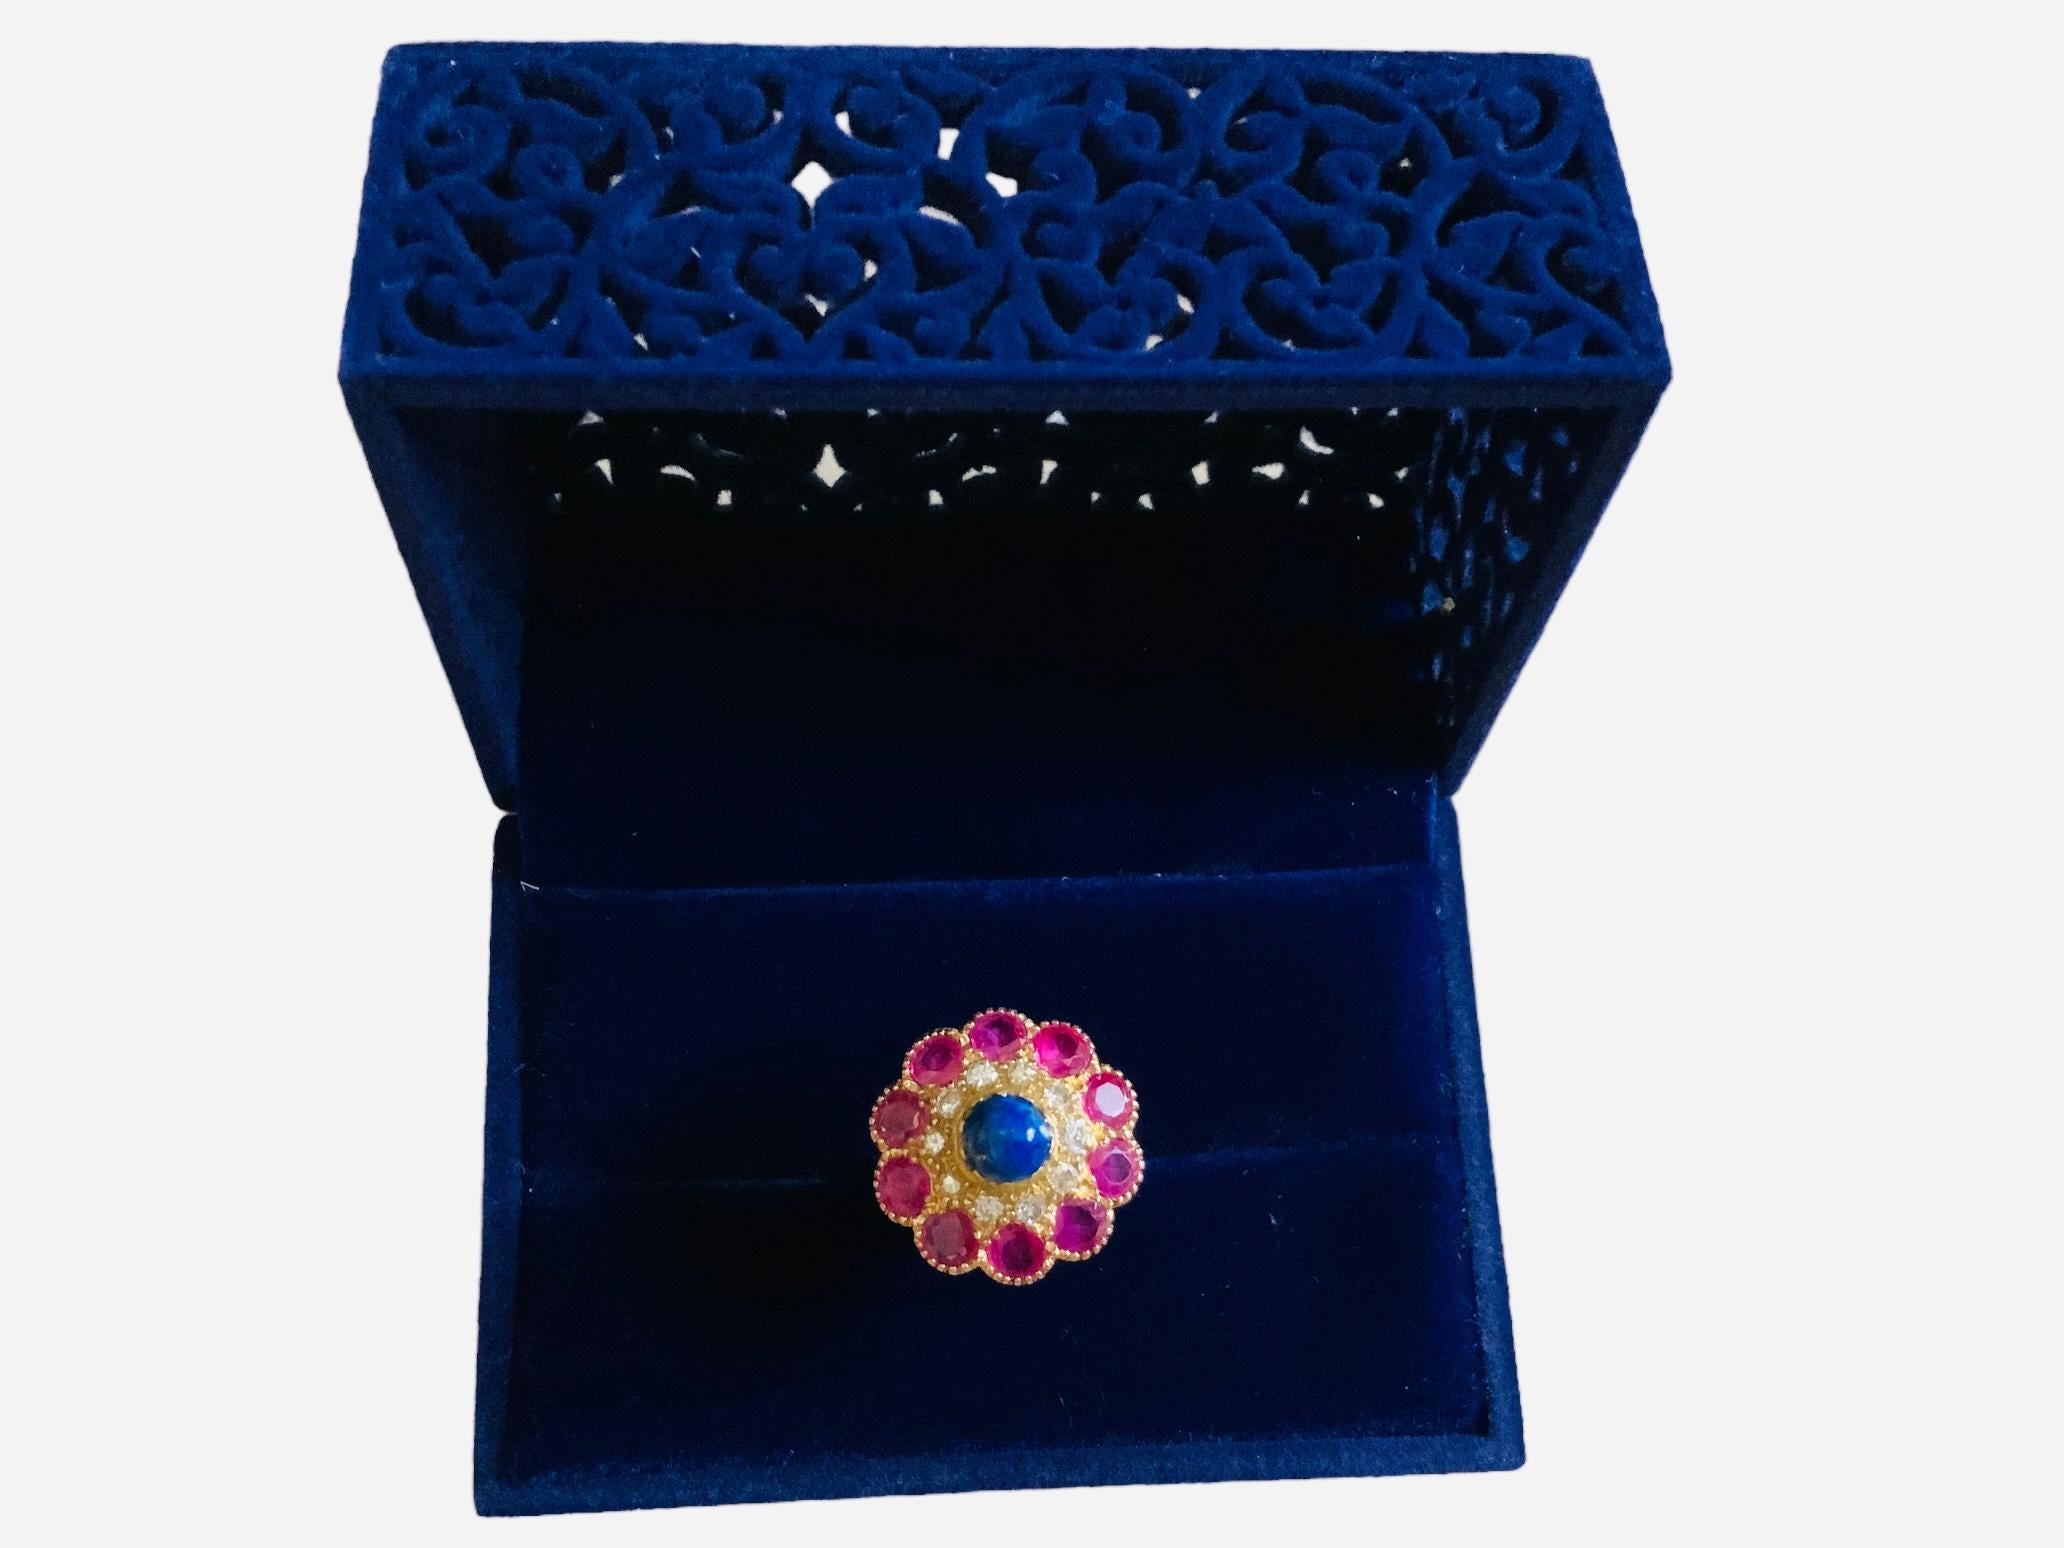 18k Yellow Gold Diamonds, Lapis Lazuli and Rubies Cocktail Ring In Good Condition For Sale In Guaynabo, PR